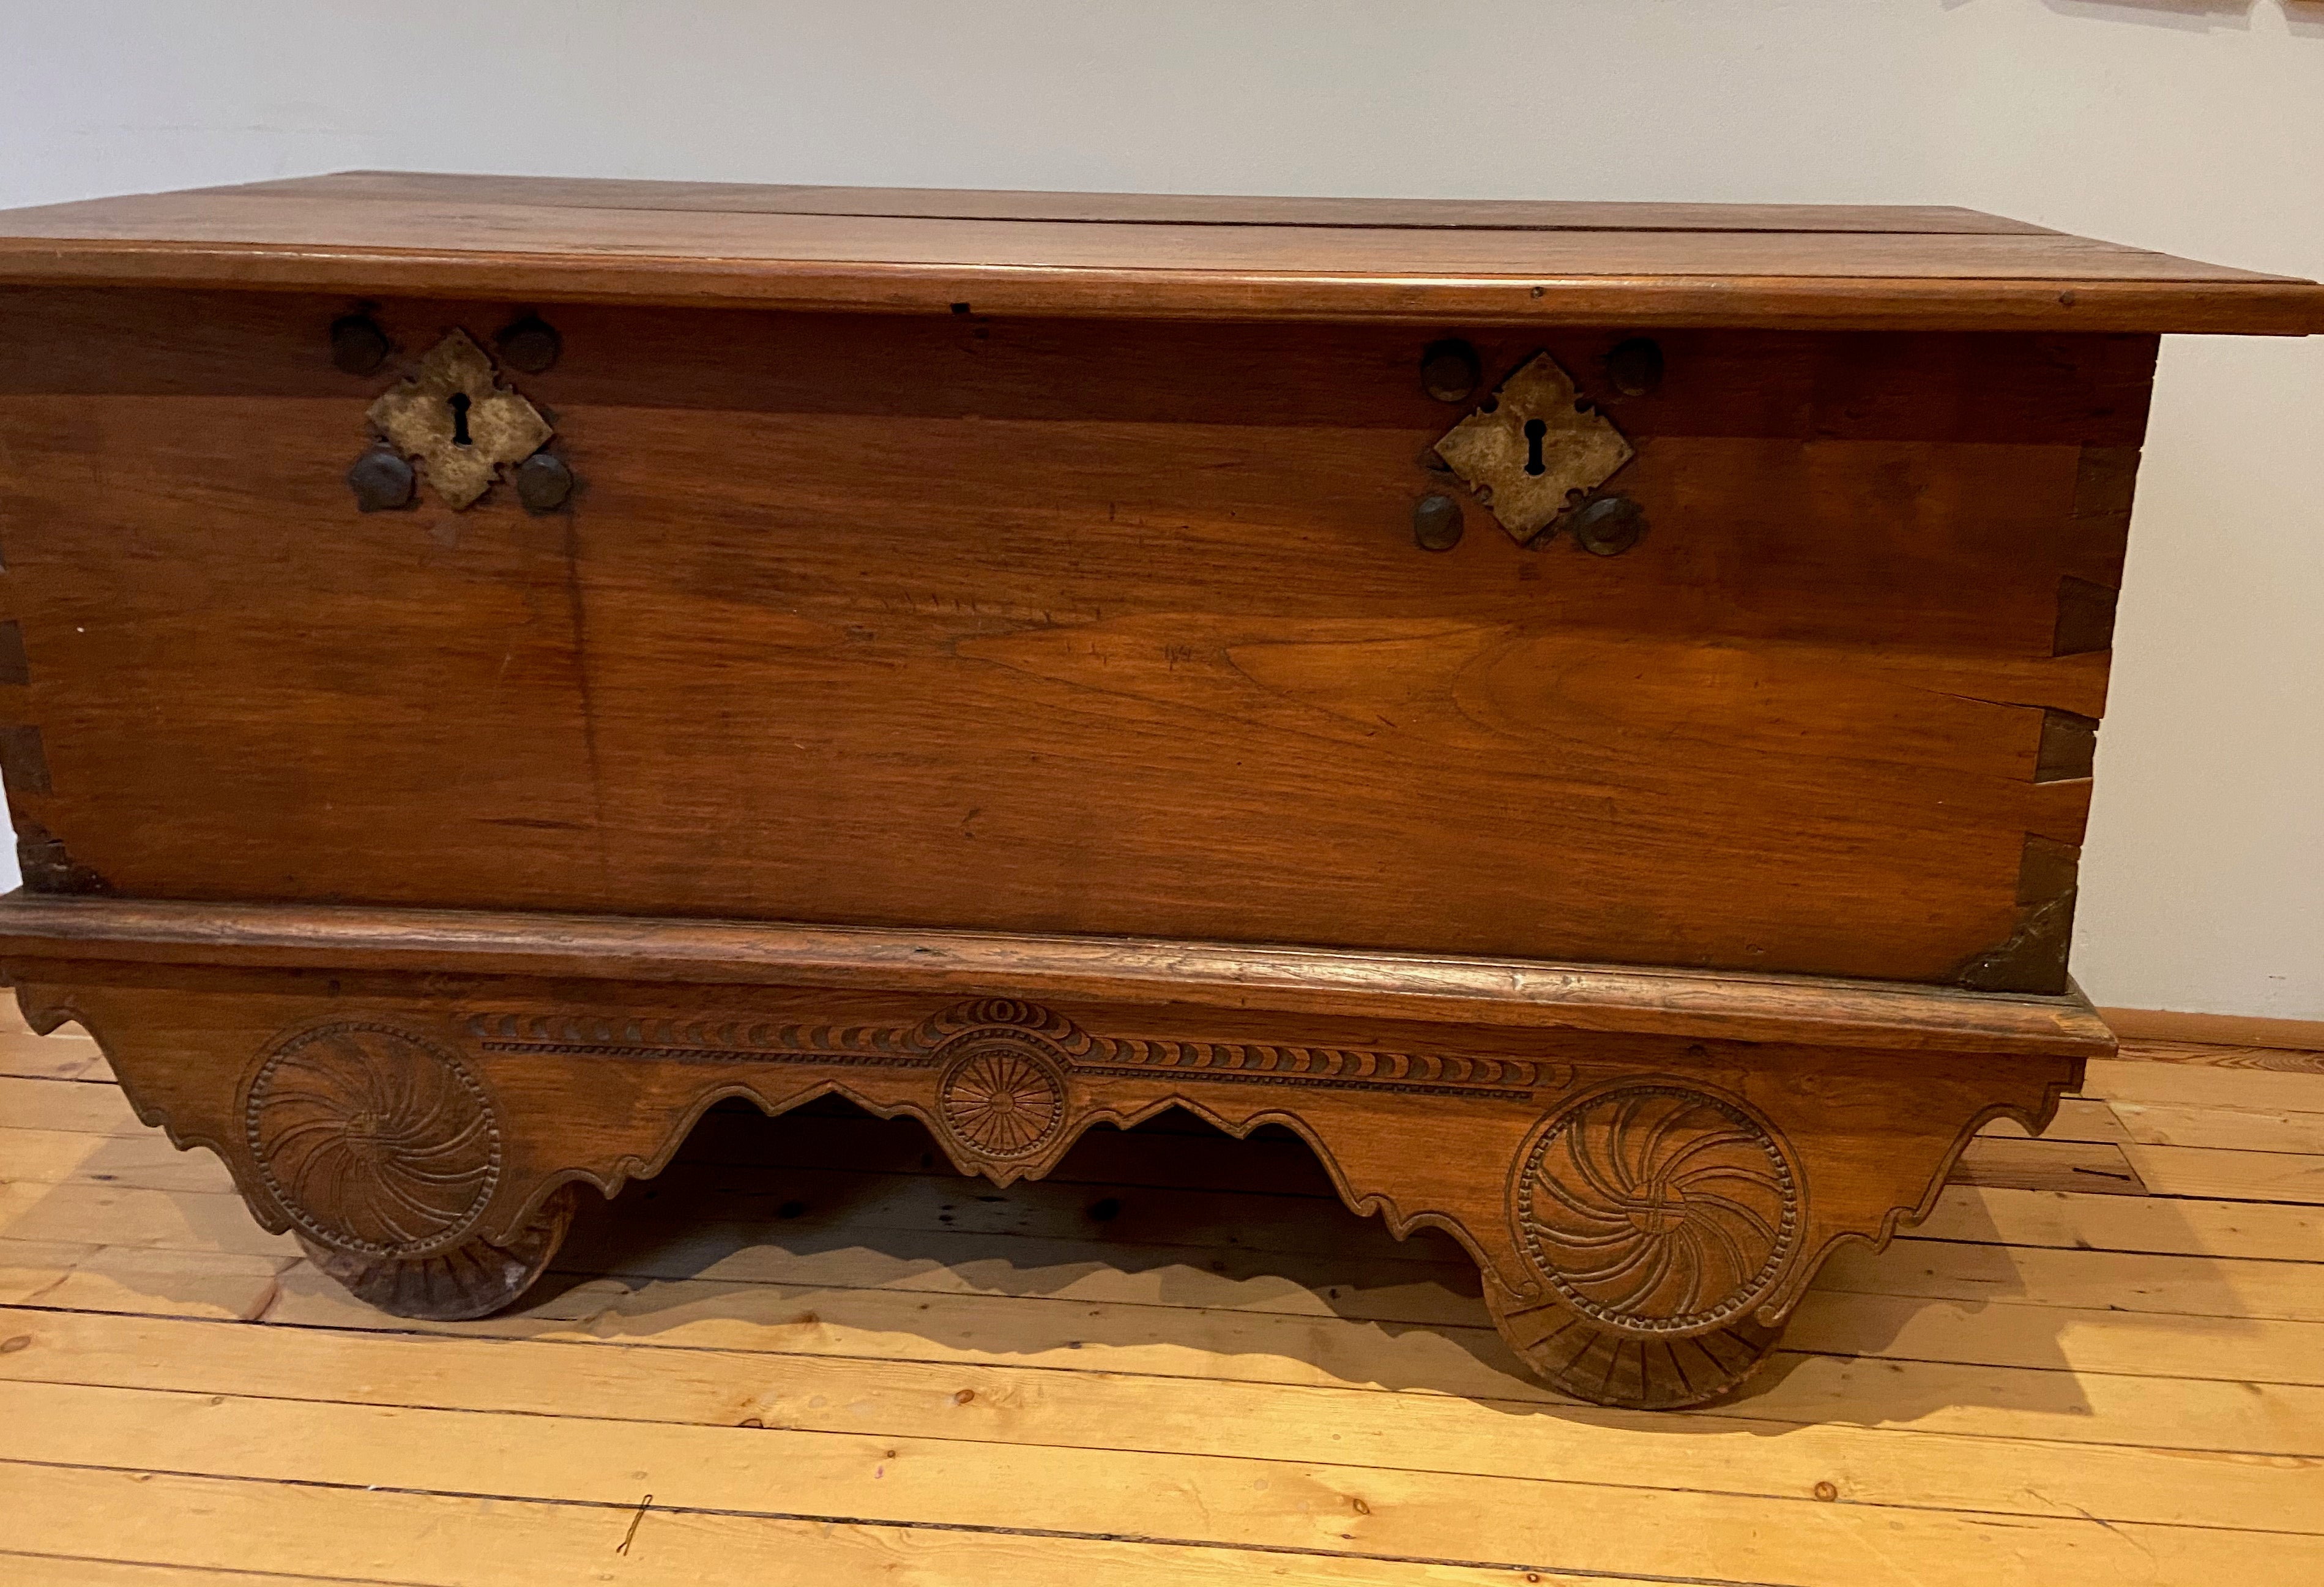 Antique Indonesian Marriage Chest or Trunk on Wheels - The Nancy Smillie Shop - Art, Jewellery & Designer Gifts Glasgow